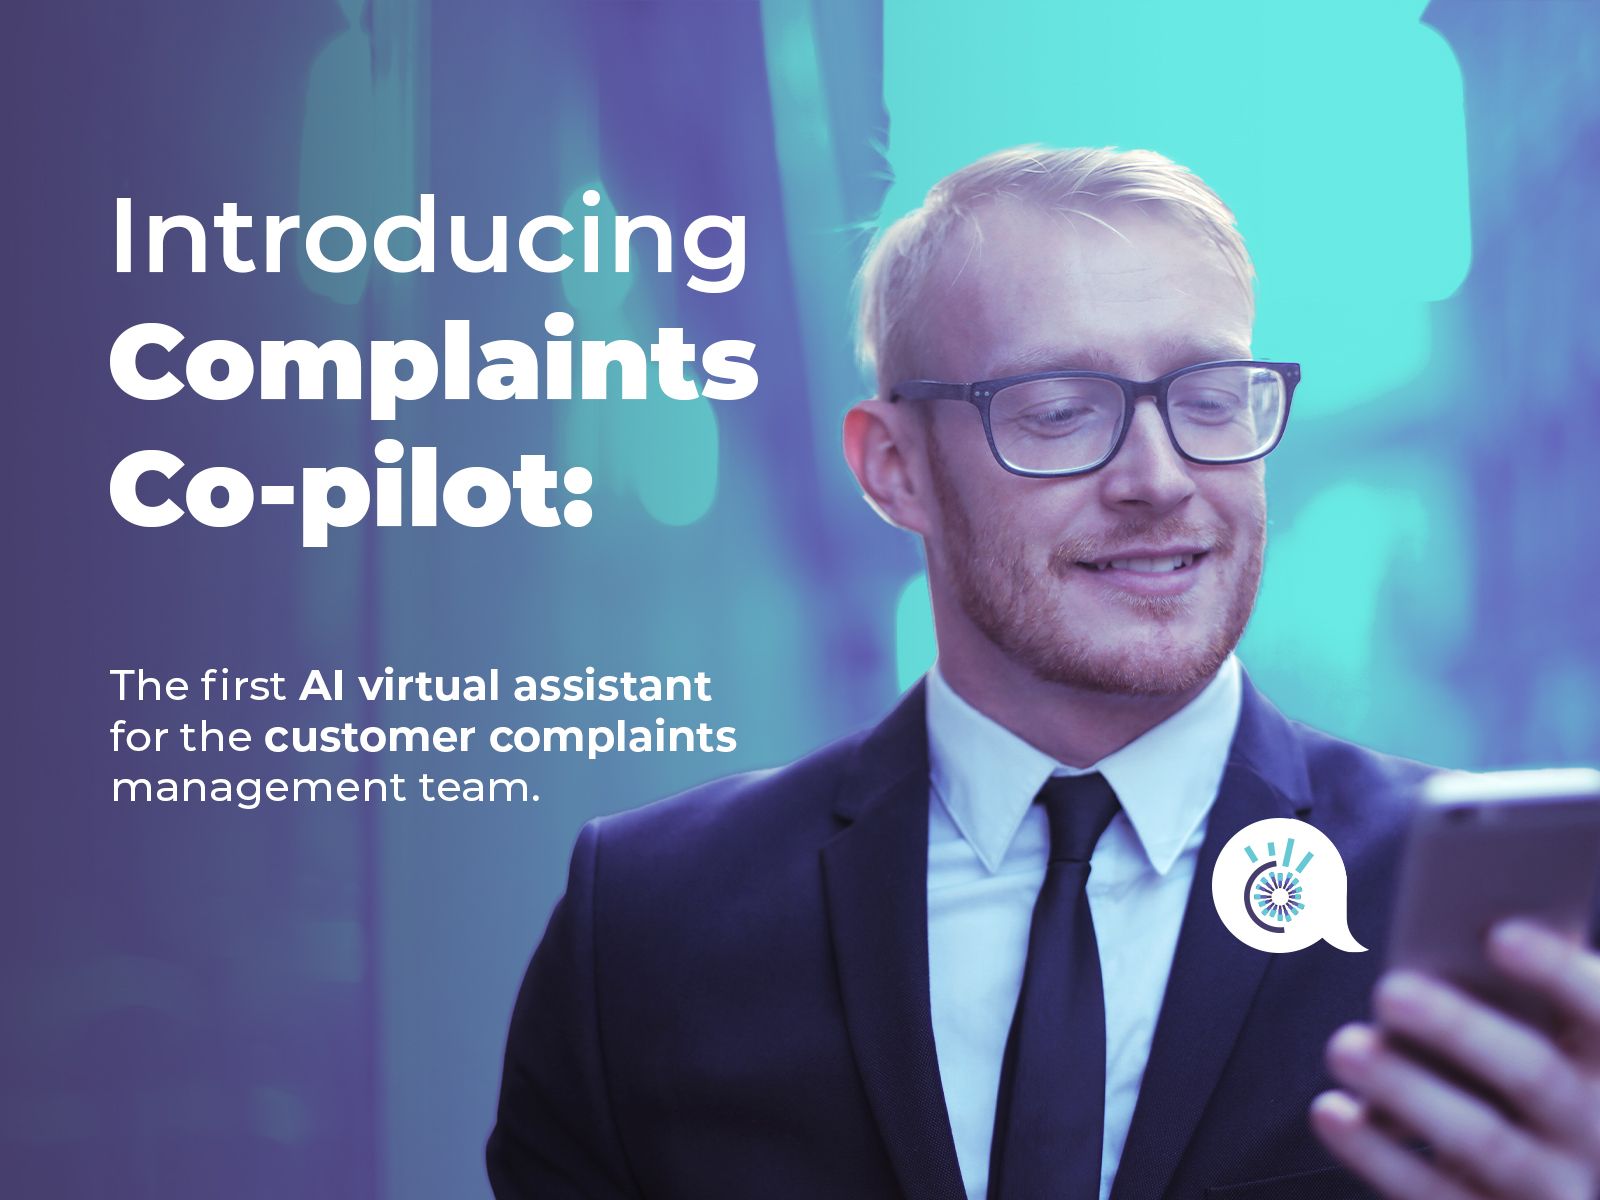 Introducing Complaints Co-pilot: The first AI virtual assistant for the customer complaints management team.